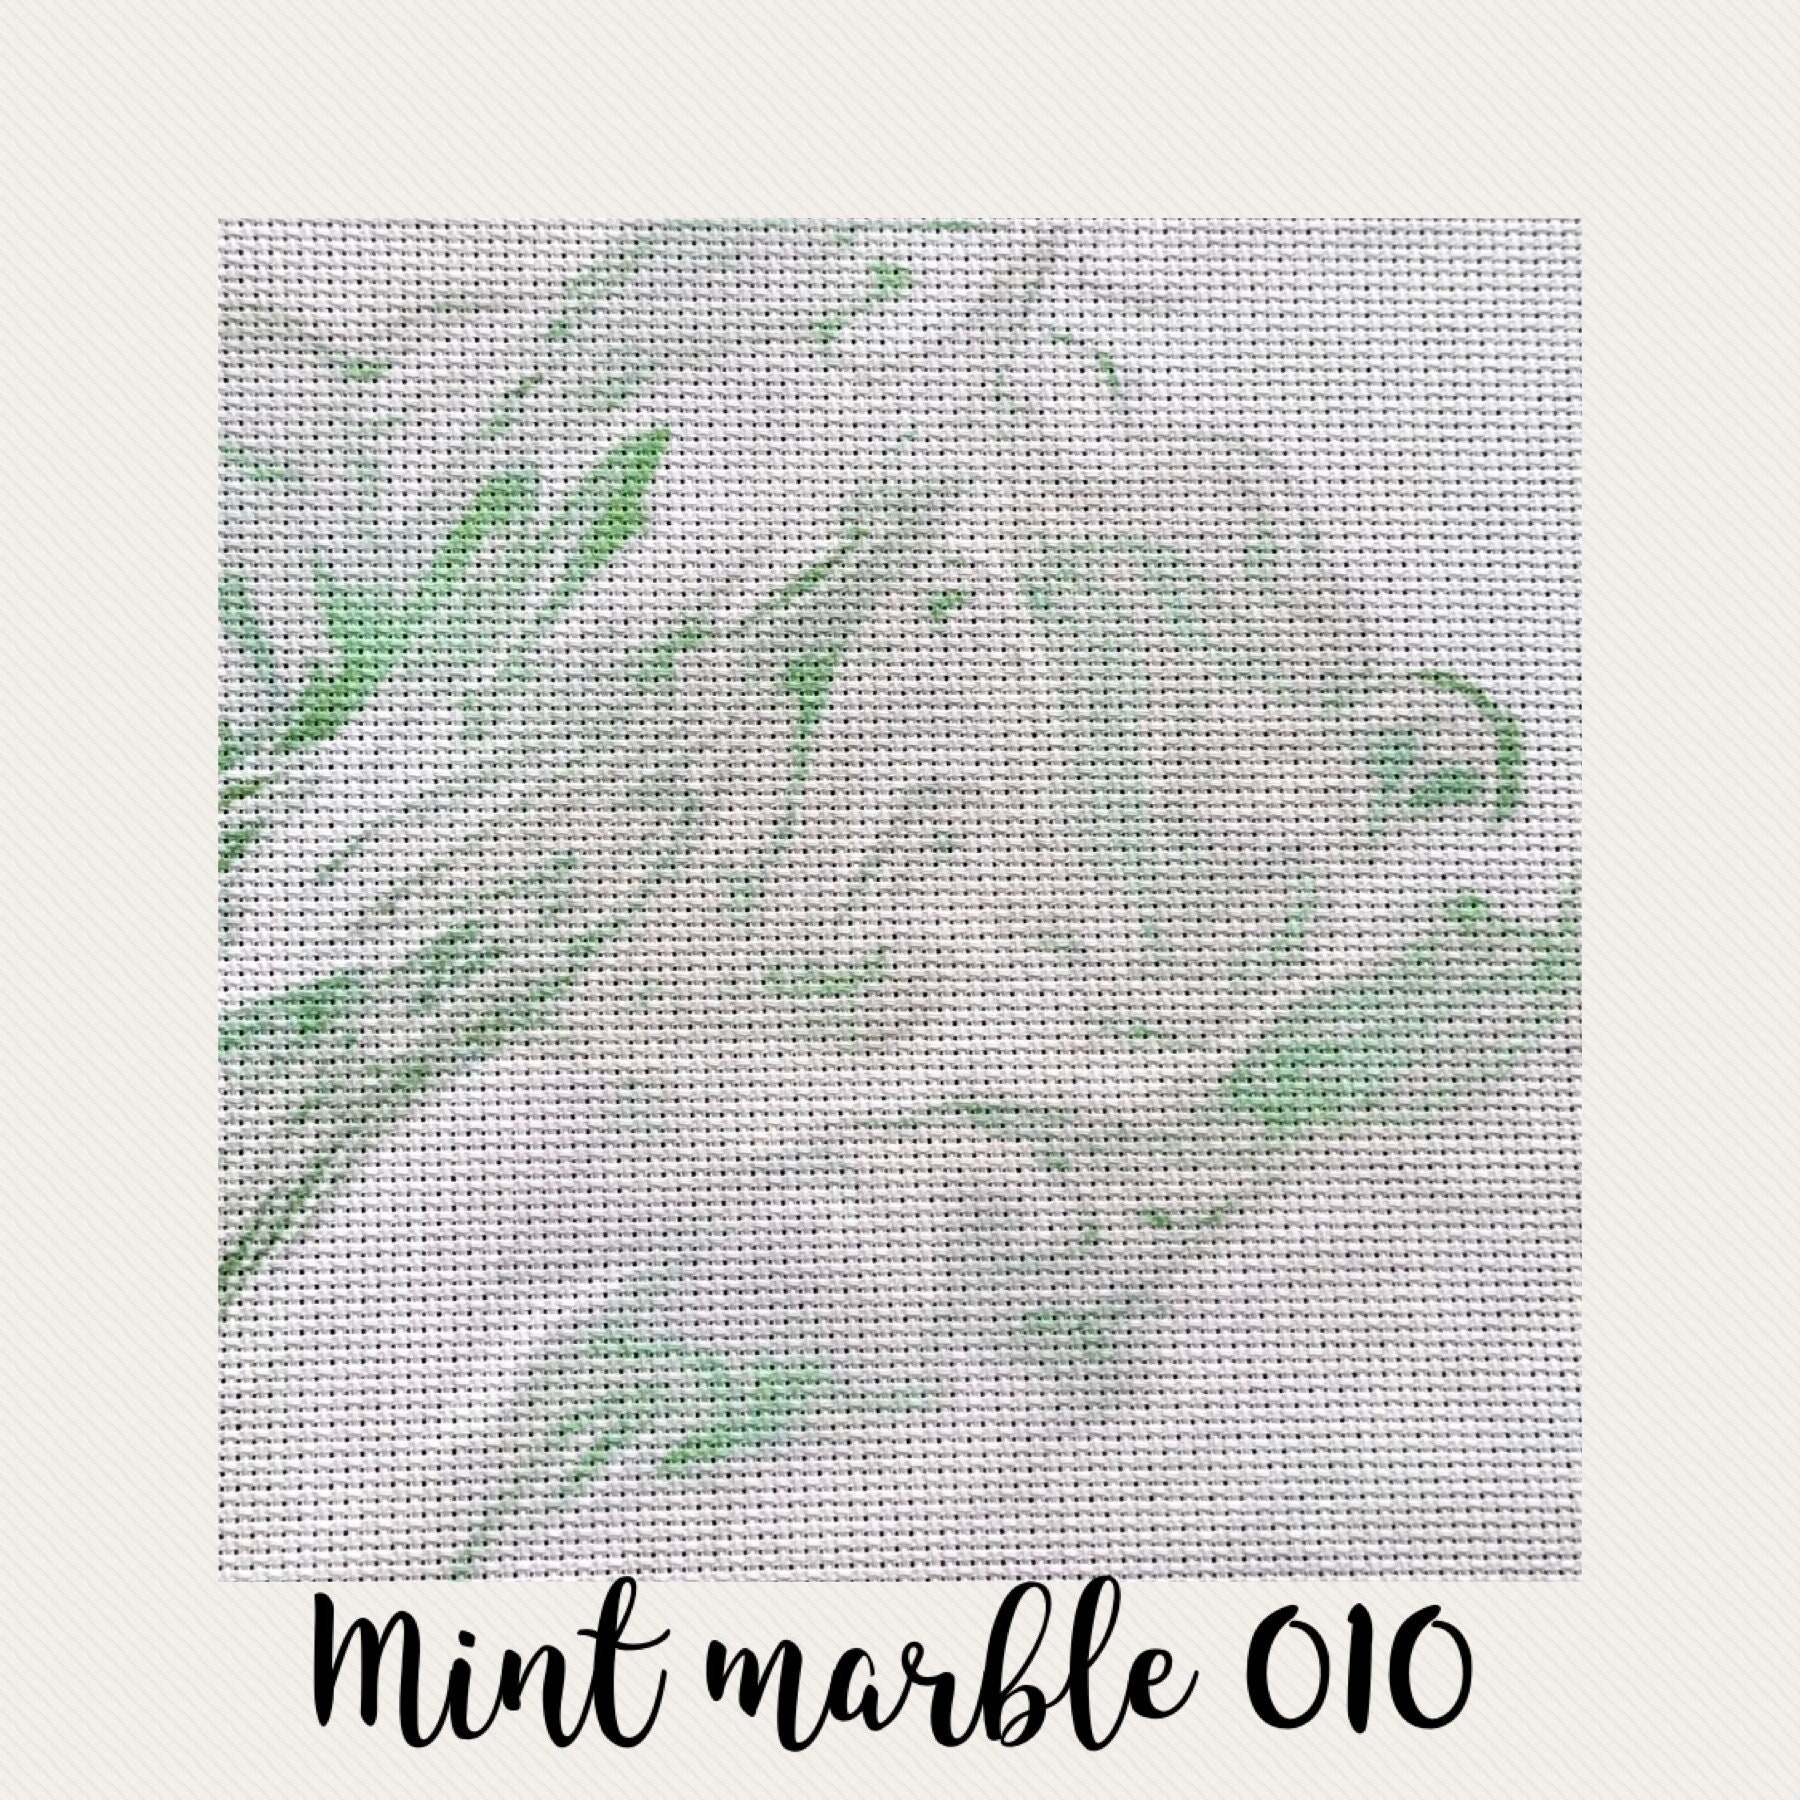 Marbled White Pine Board - Patterned Cross Stitch Fabric 